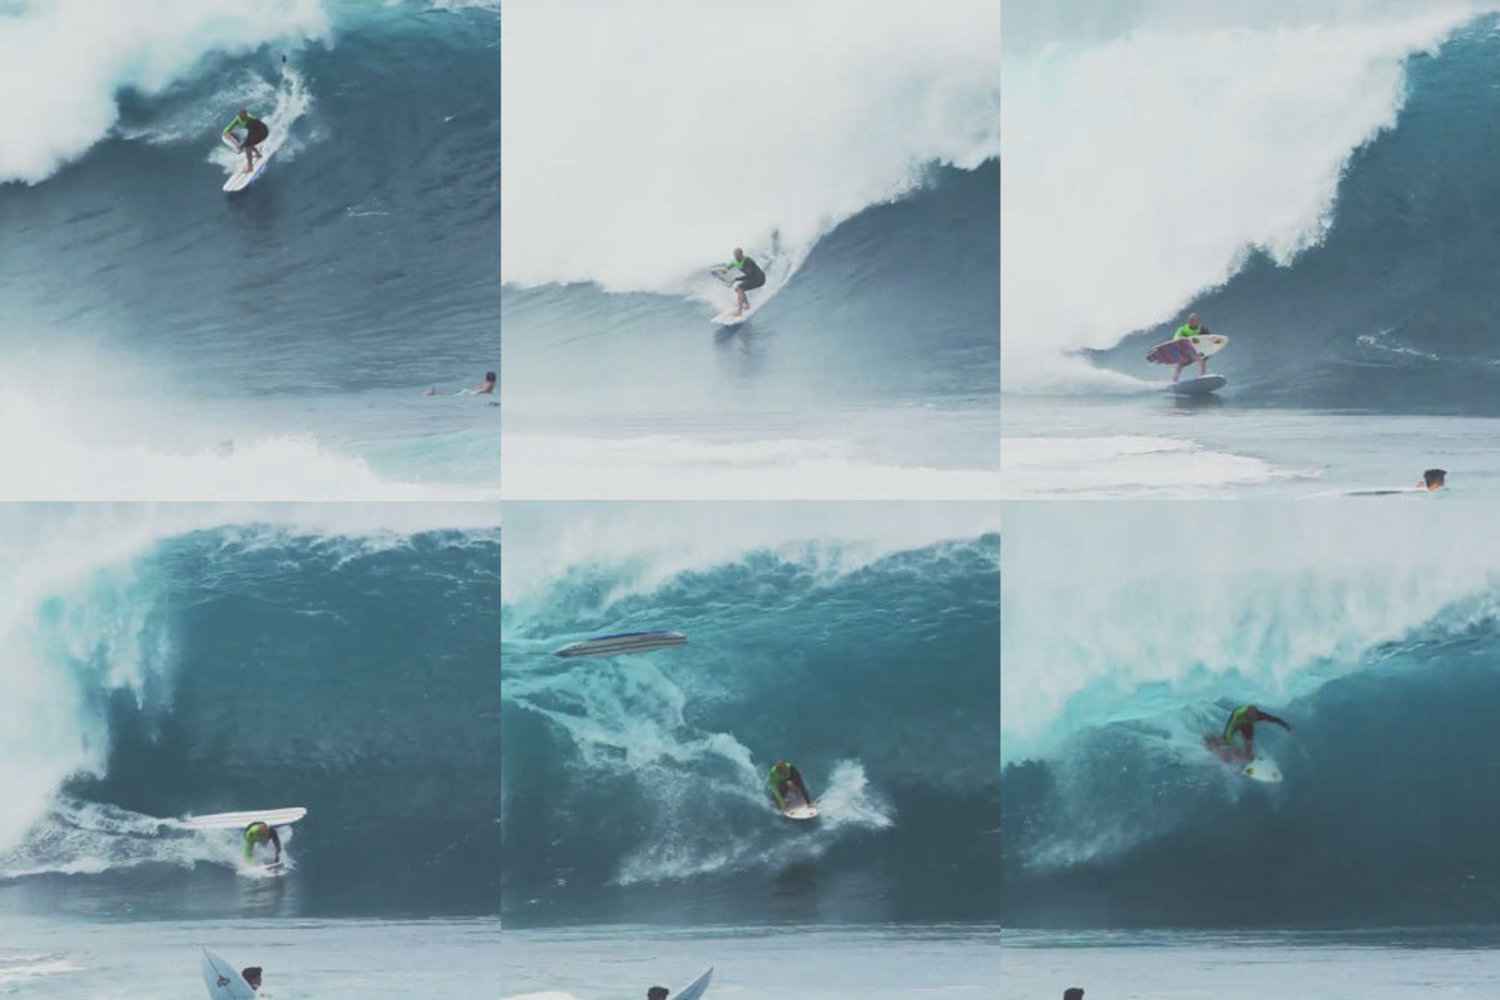 Jamie O'Brien Board Transfer At The Wedge